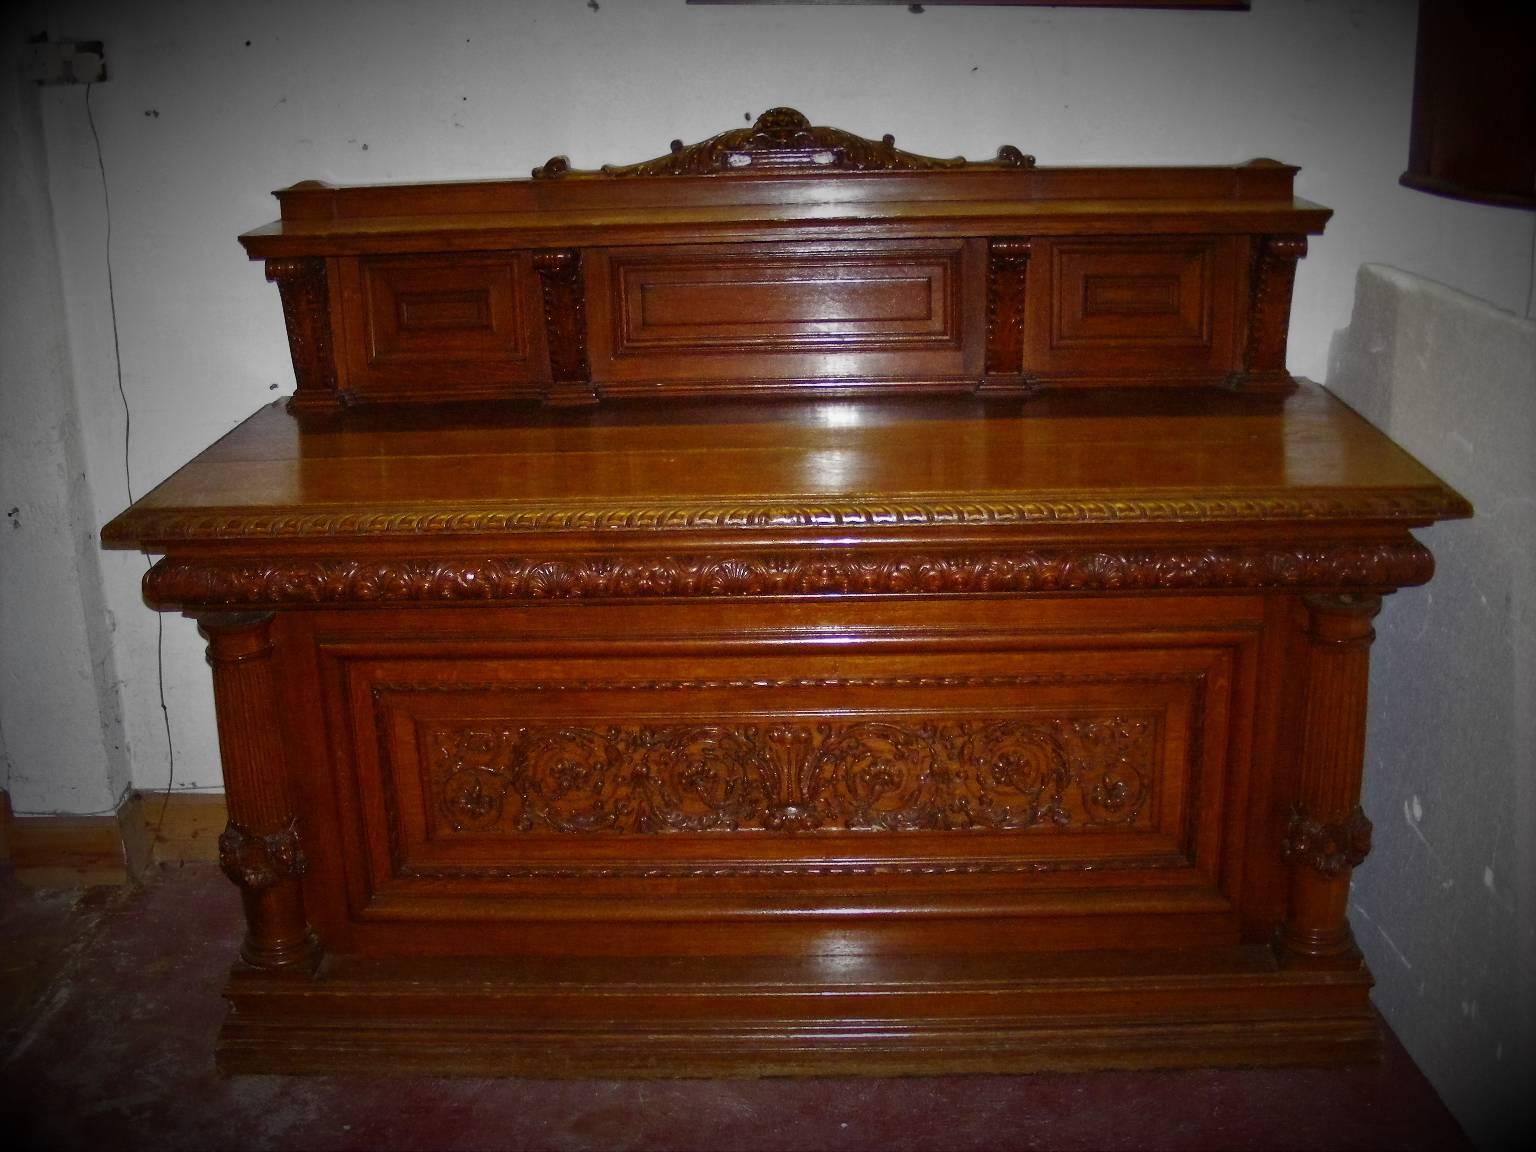 An important and majestically carved late Victorian, circa 1900 country house sideboard. The central feature depicting the Prince of Wales feathers emerging from a coronet flanked with generous scrolls and carved foliage with a harvest of fruit. The